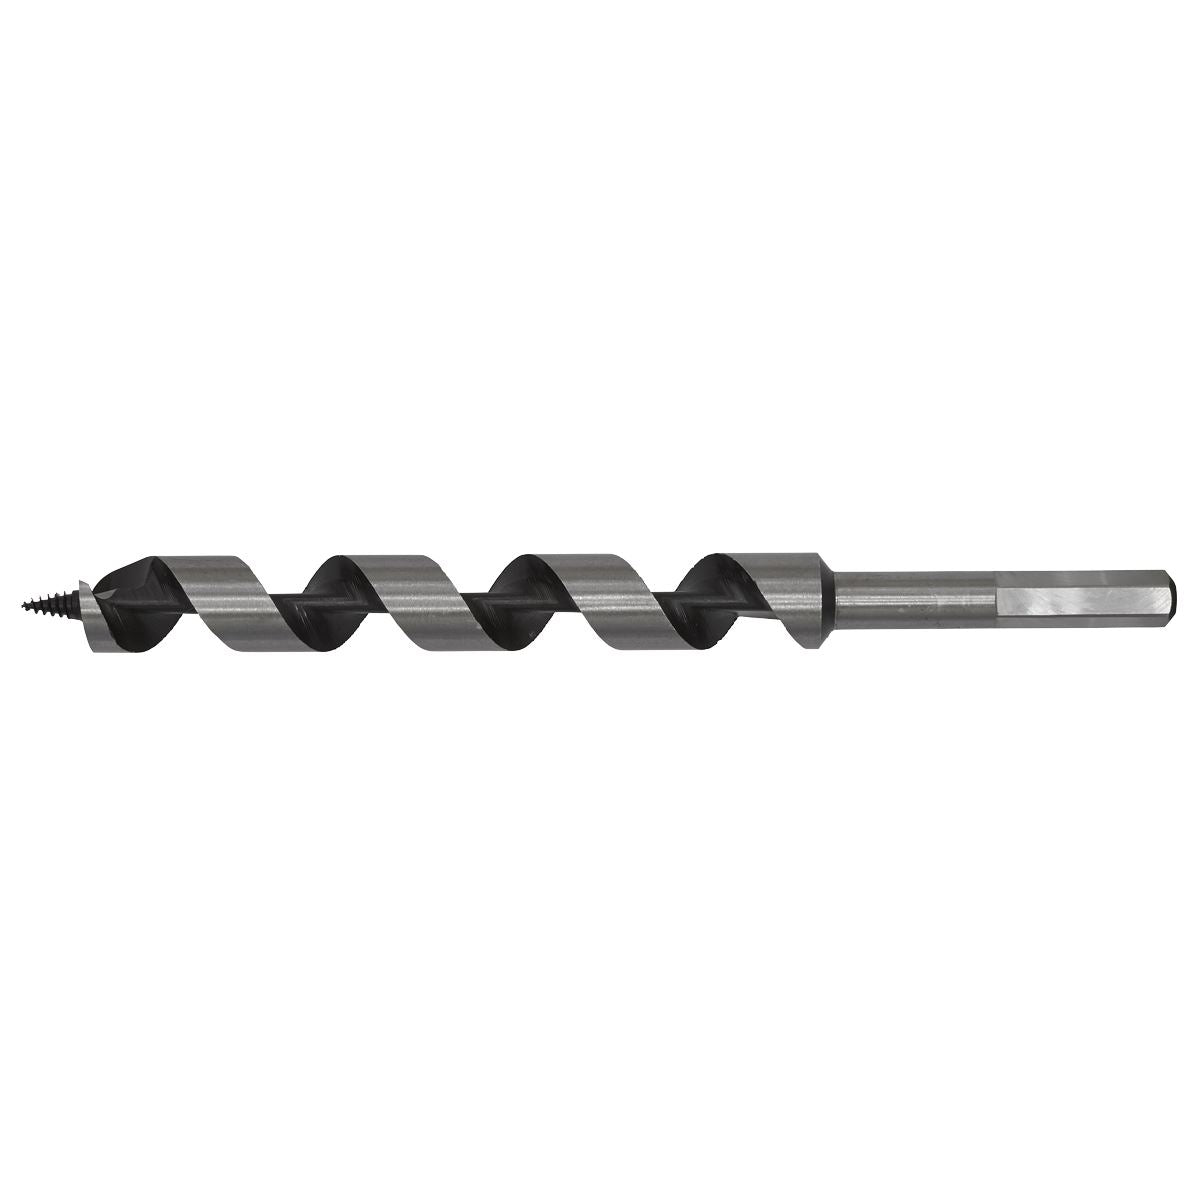 Worksafe by Sealey Auger Wood Drill Bit 20mm x 235mm